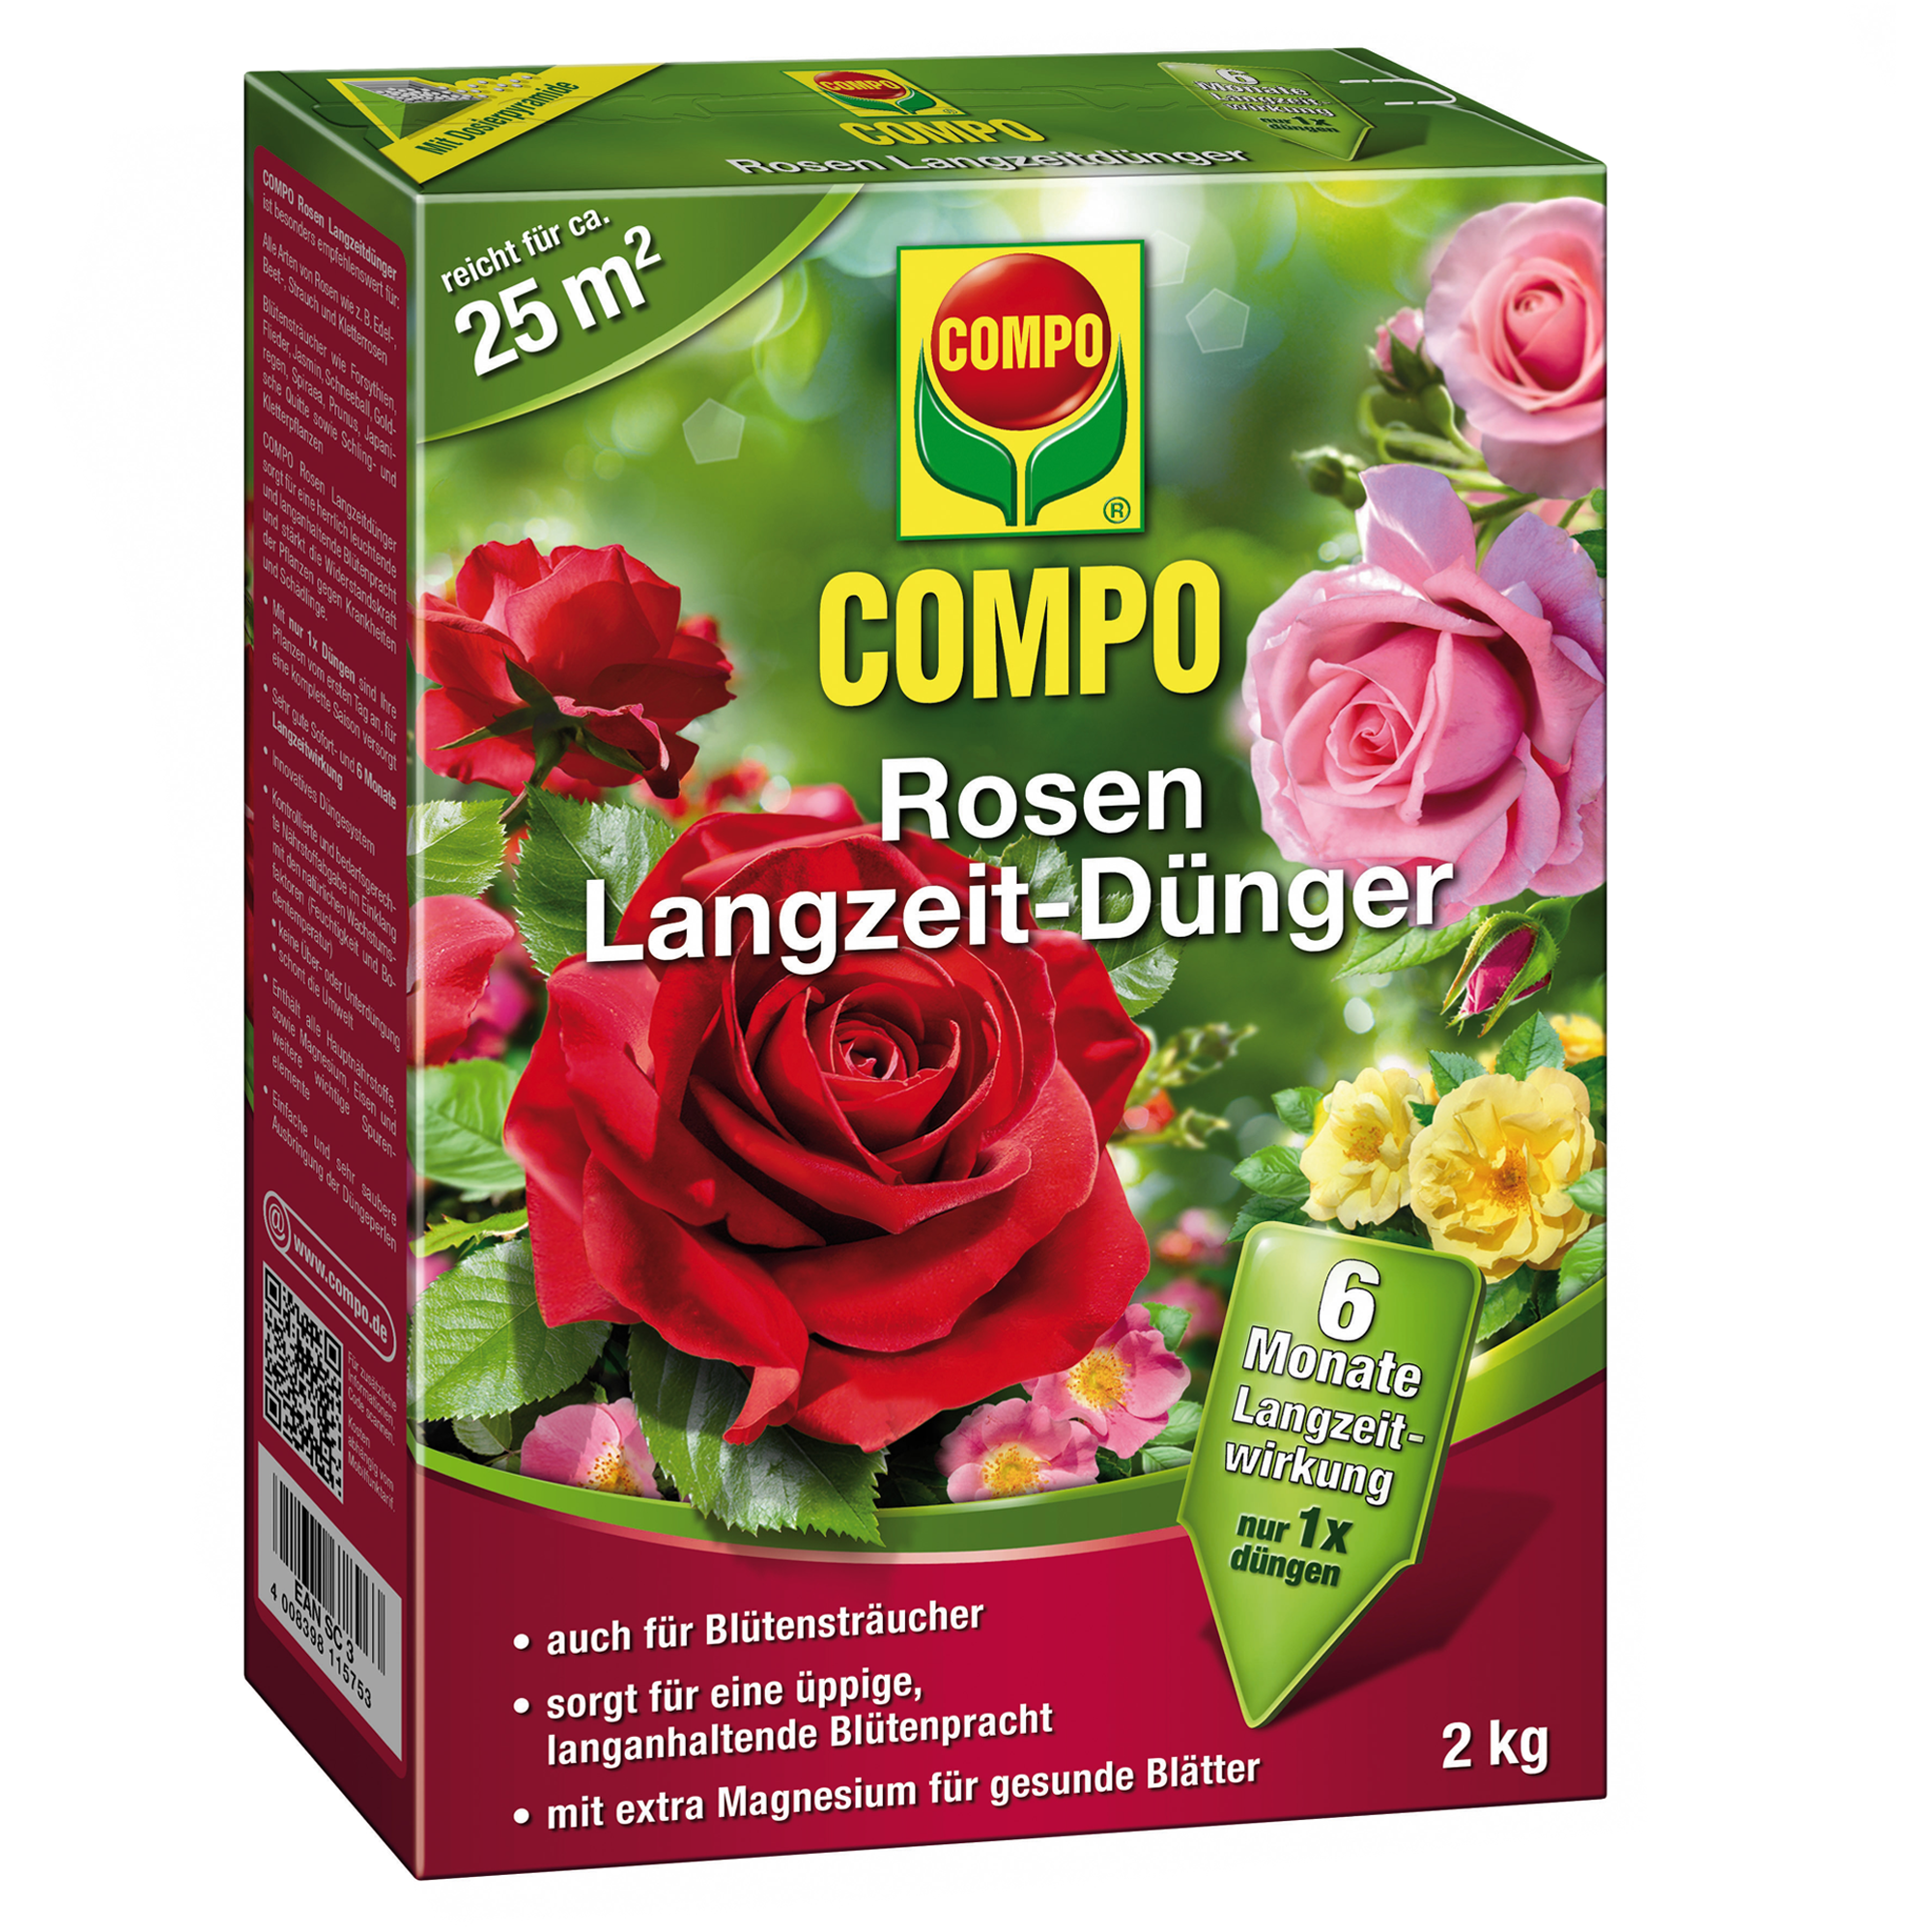 Rosen-Langzeitdünger 2 kg + product picture